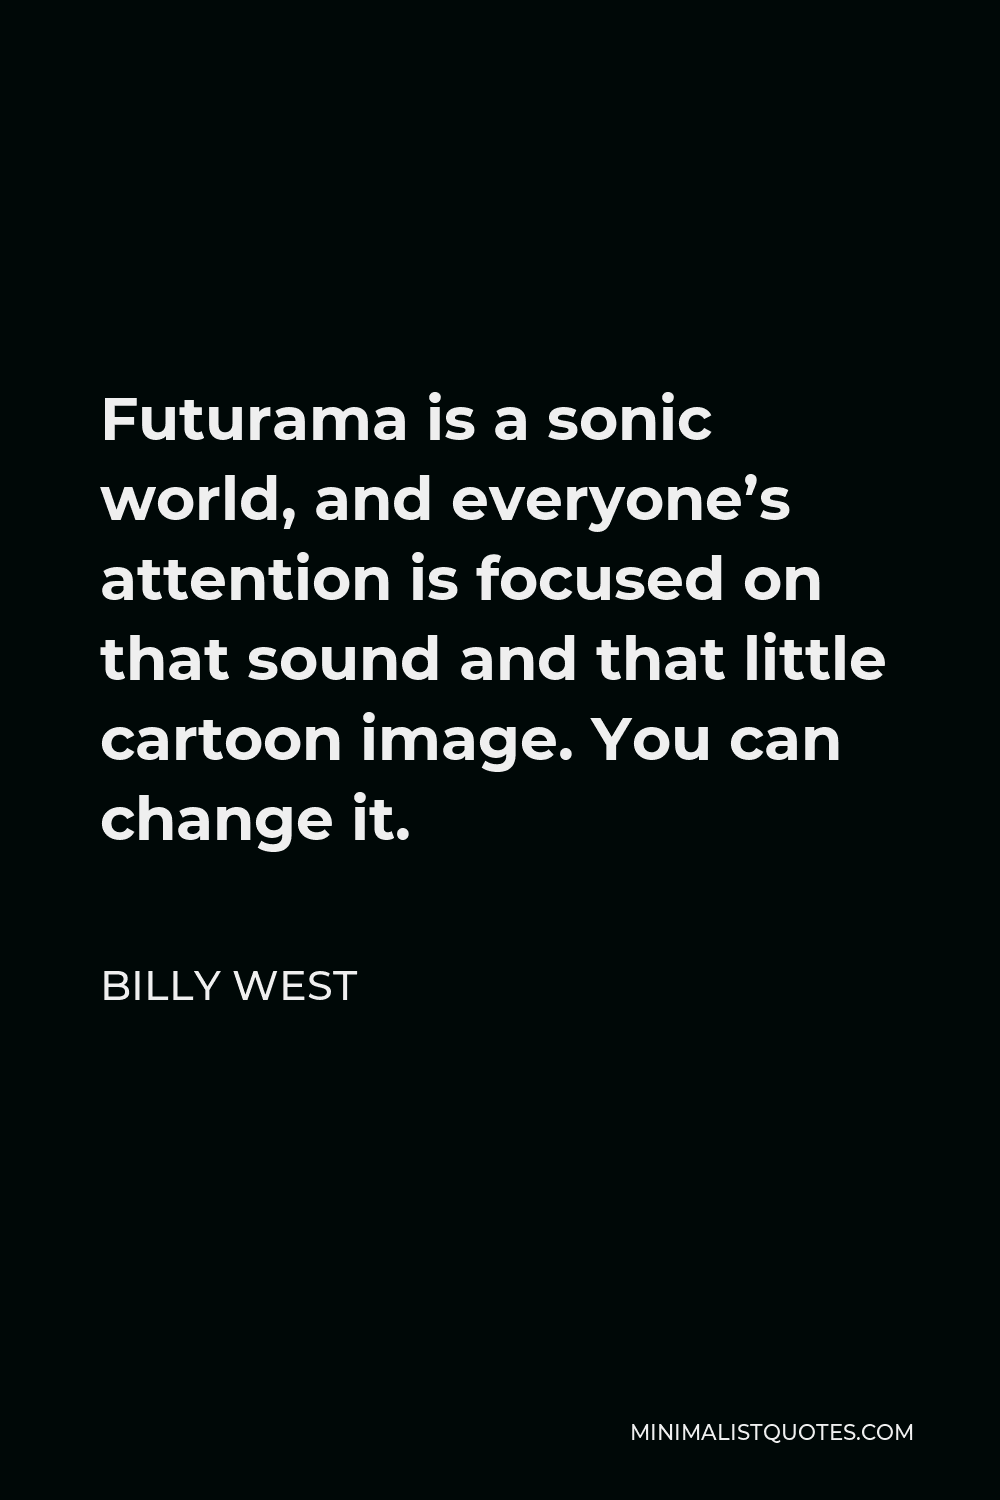 Billy West Quote - Futurama is a sonic world, and everyone’s attention is focused on that sound and that little cartoon image. You can change it.